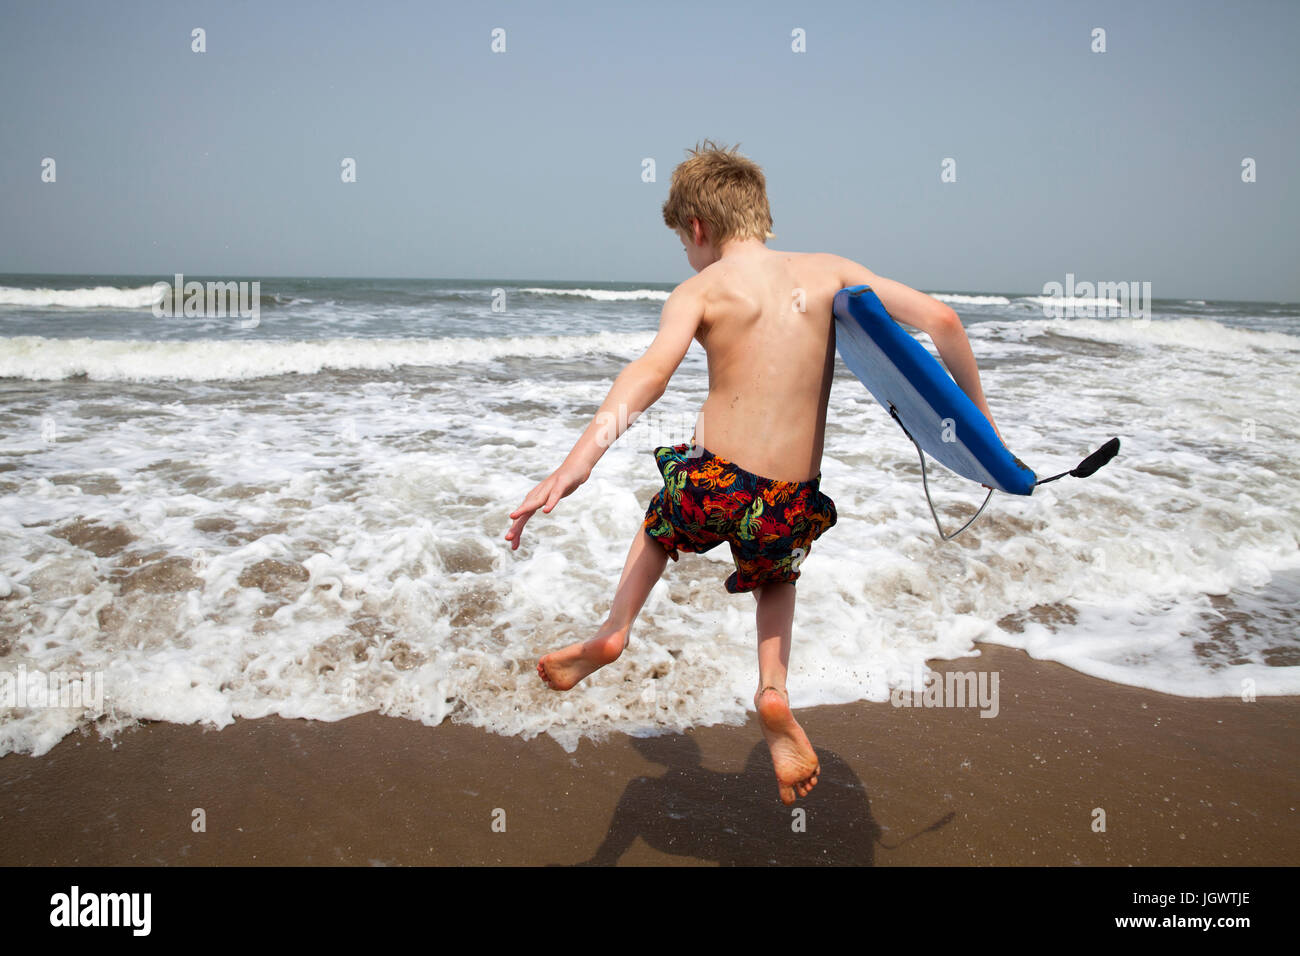 Rear view of boy with bodyboard jumping in sea, Goa, India, Asia Stock Photo